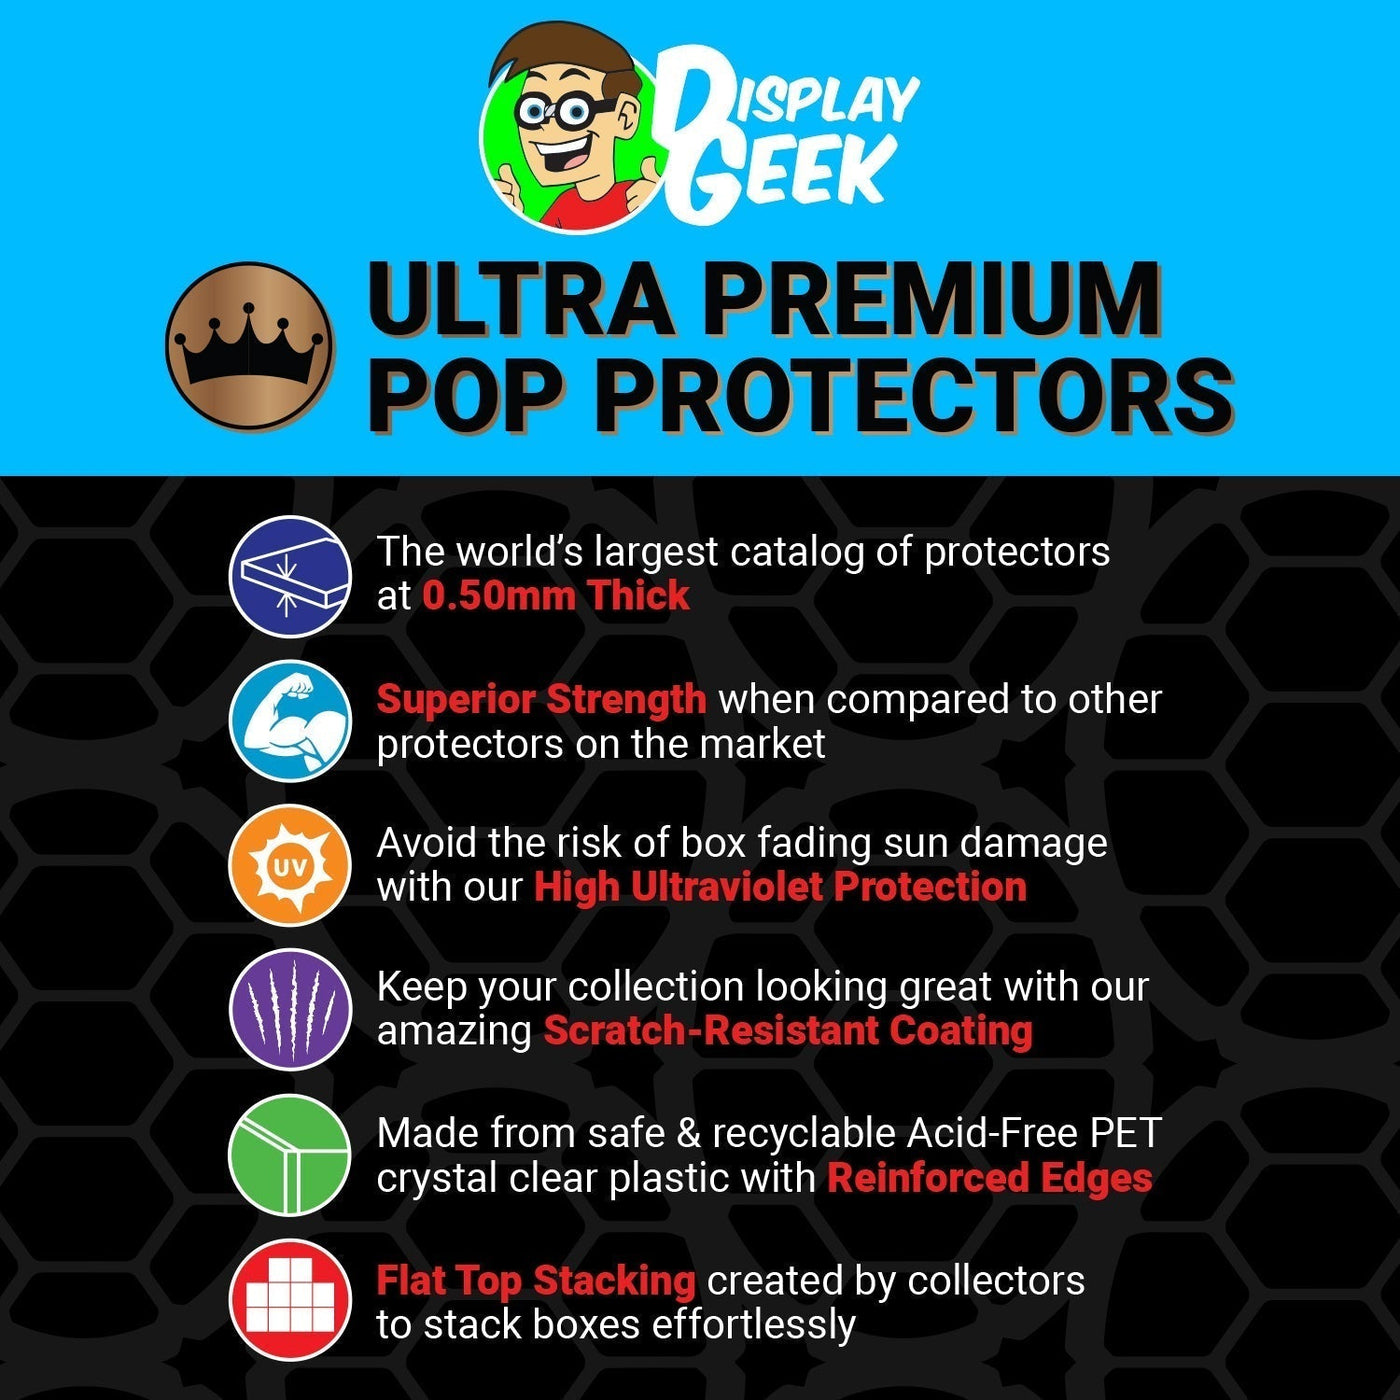 Pop Protector for Bearbrick Blue D-Con FunkO's Cereal Box on The Protector Guide App by Display Geek